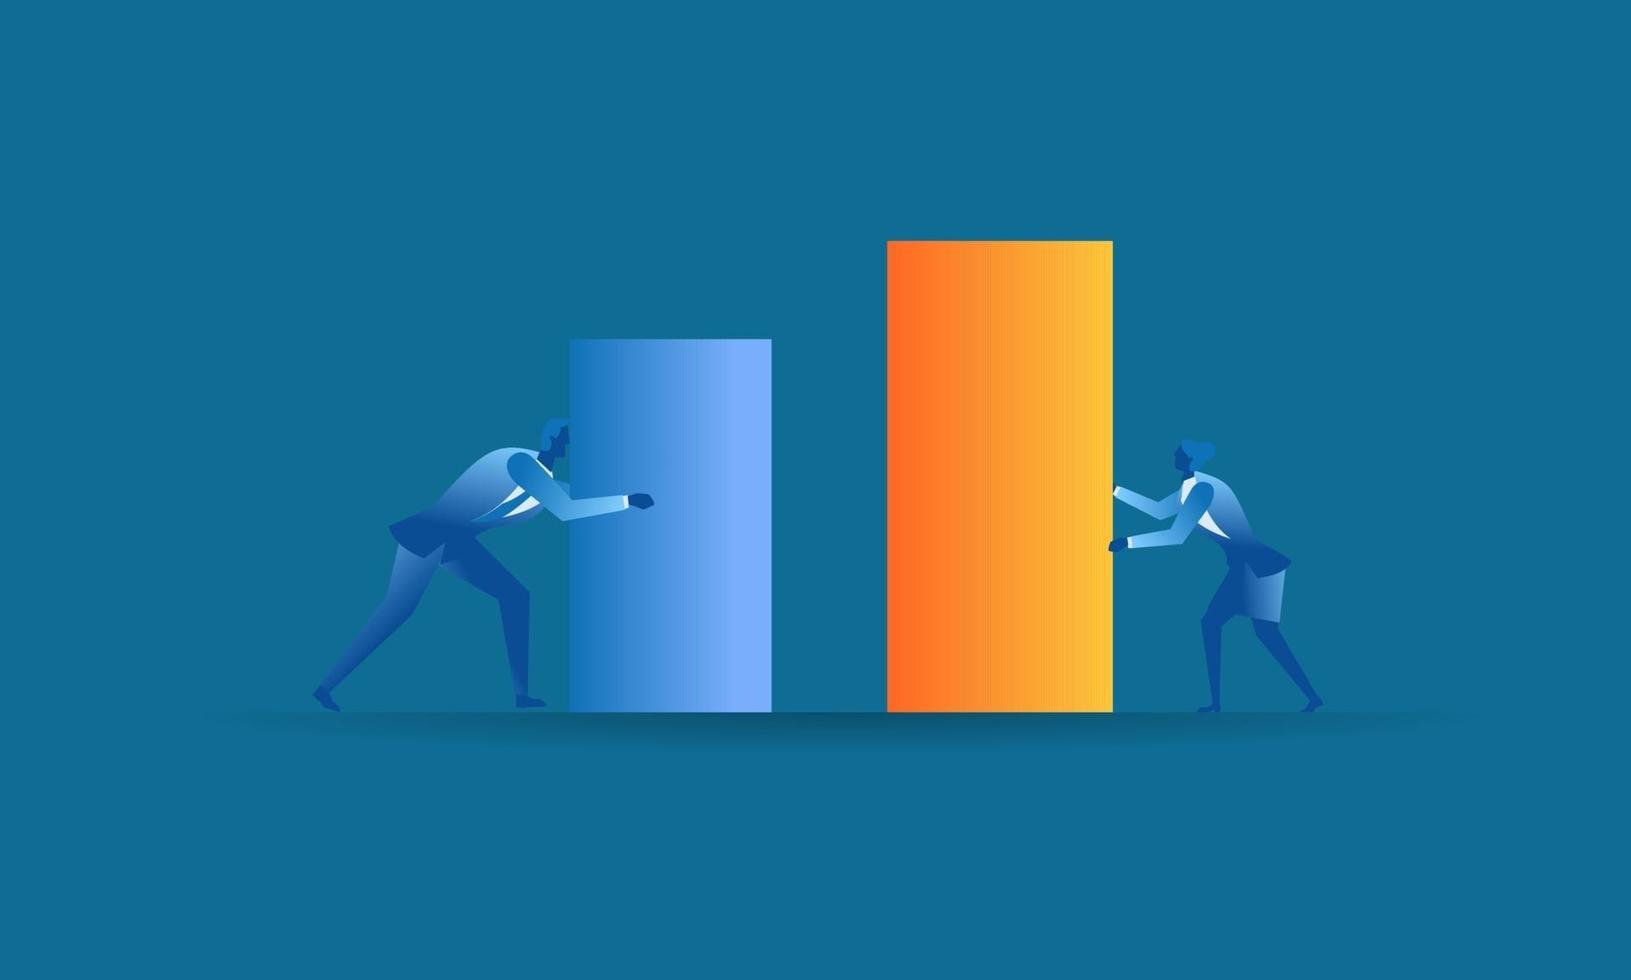 man holding the blue bar as cost and woman holding the orange bar as profit concept illustration About profits must be greater than costs economic principles flat design vector